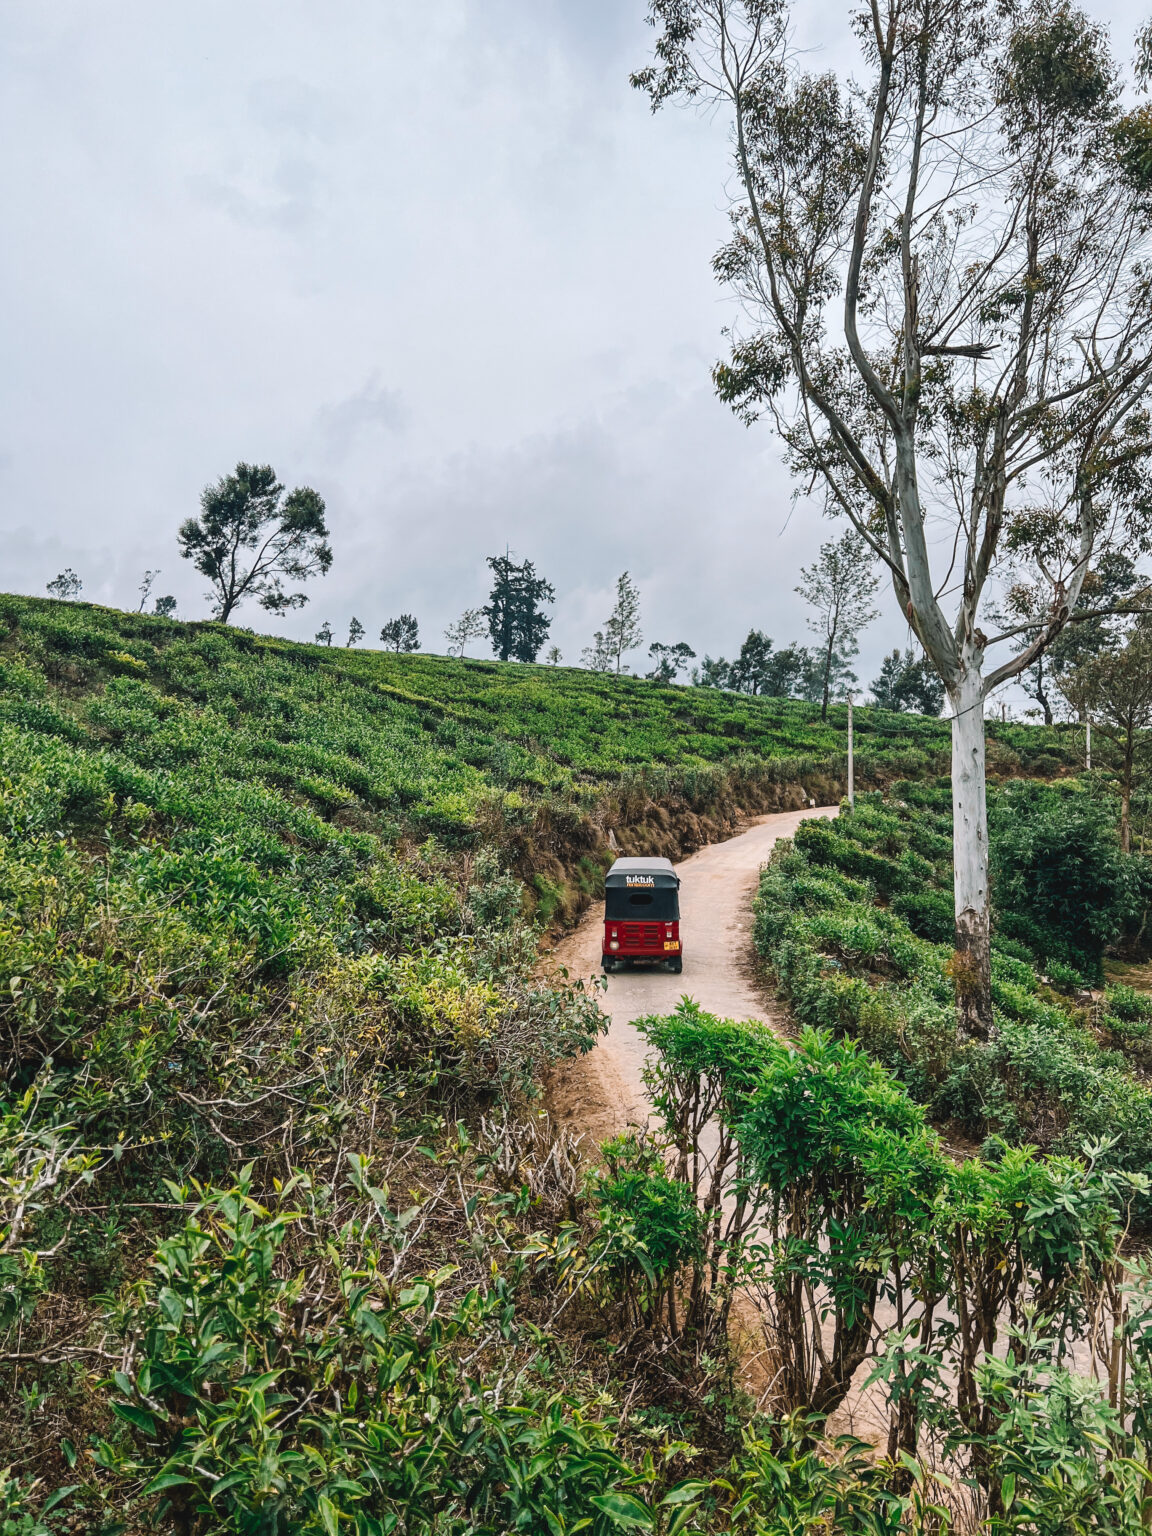 Tea tales on the road - Capture the essence of Nuwara Eliya's tea culture with a tuktuk drive through the emerald plantations